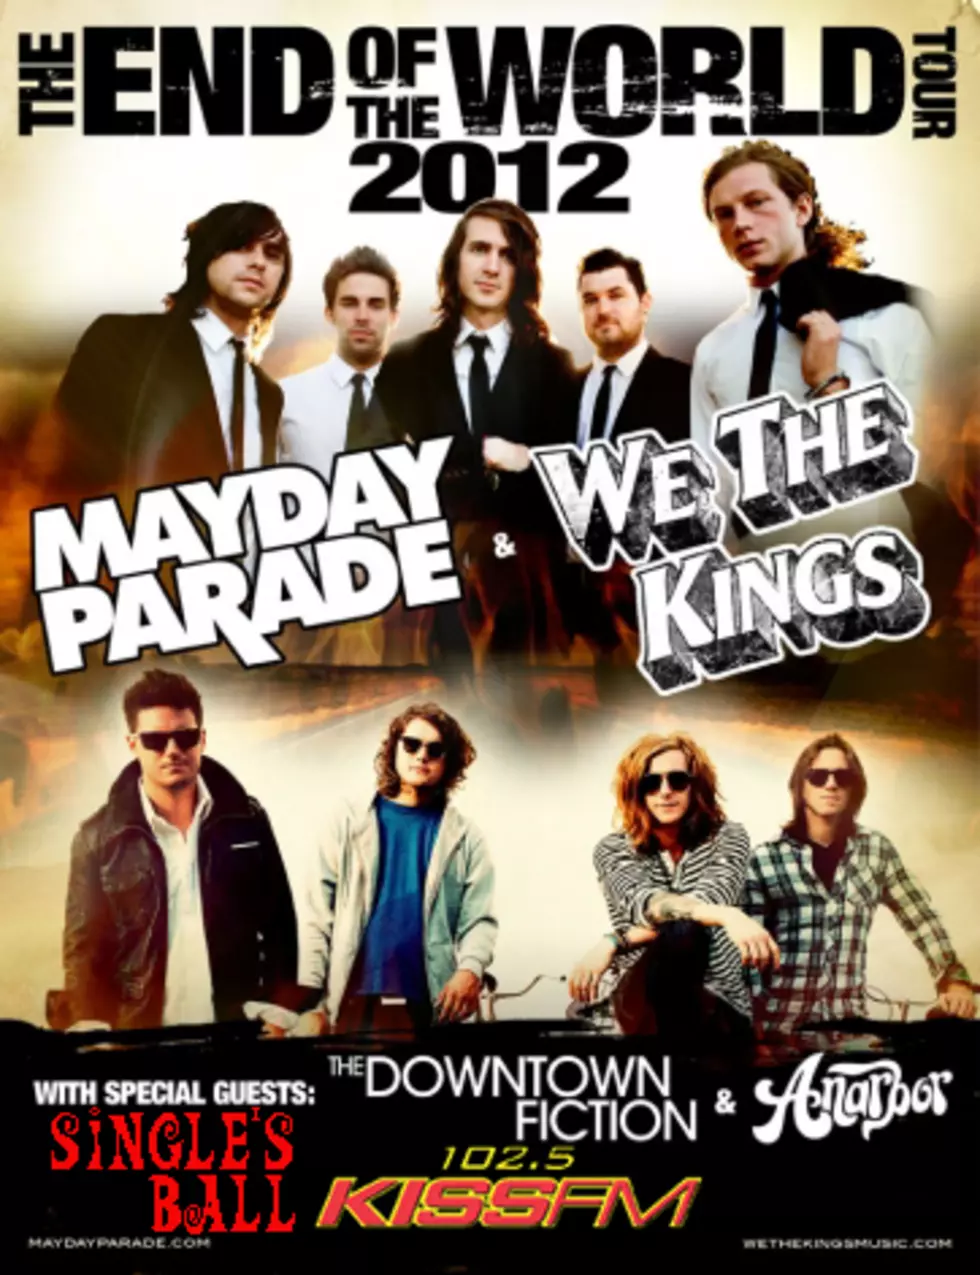 KISS FM&#8217;s First Ever Single&#8217;s Ball is Coming Featuring We The Kings and Mayday Parade [VIDEO]